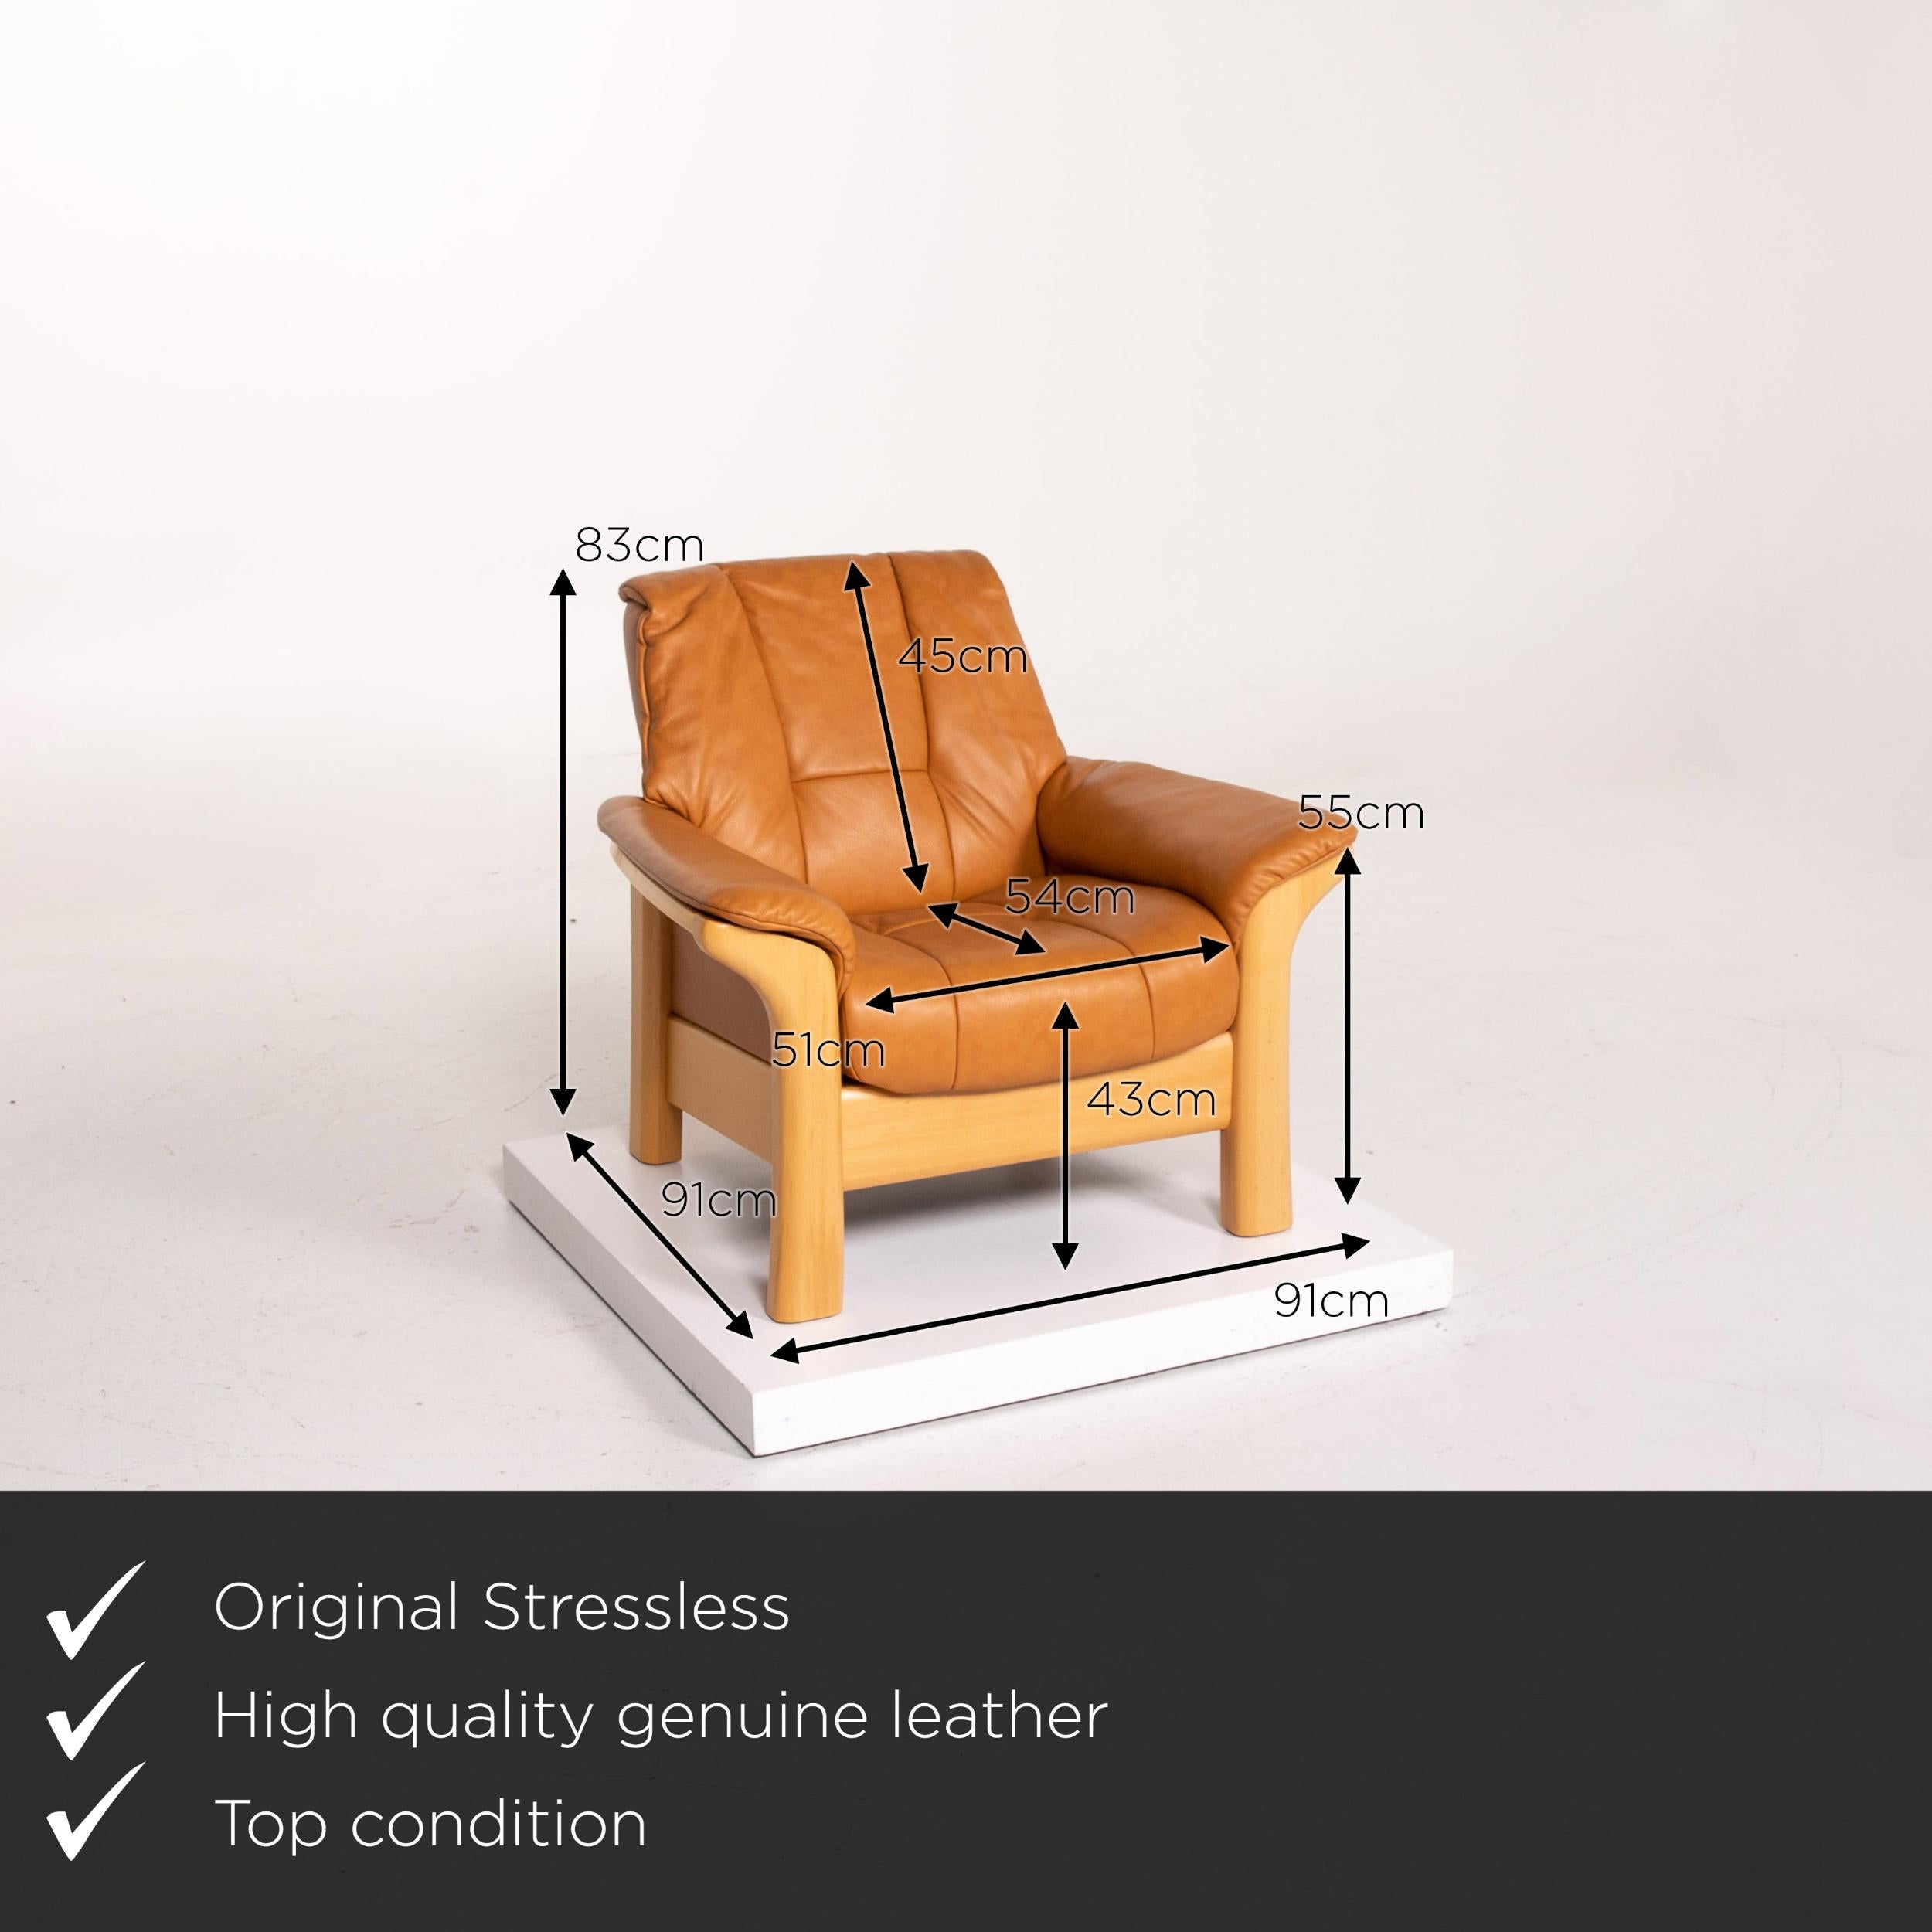 We present to you a Stressless Kensington leather armchair cognac brown.


 Product measurements in centimeters:
 

Depth: 91
Width: 91
Height: 83
Seat height: 43
Rest height: 55
Seat depth: 54
Seat width: 51
Back height: 45.
 